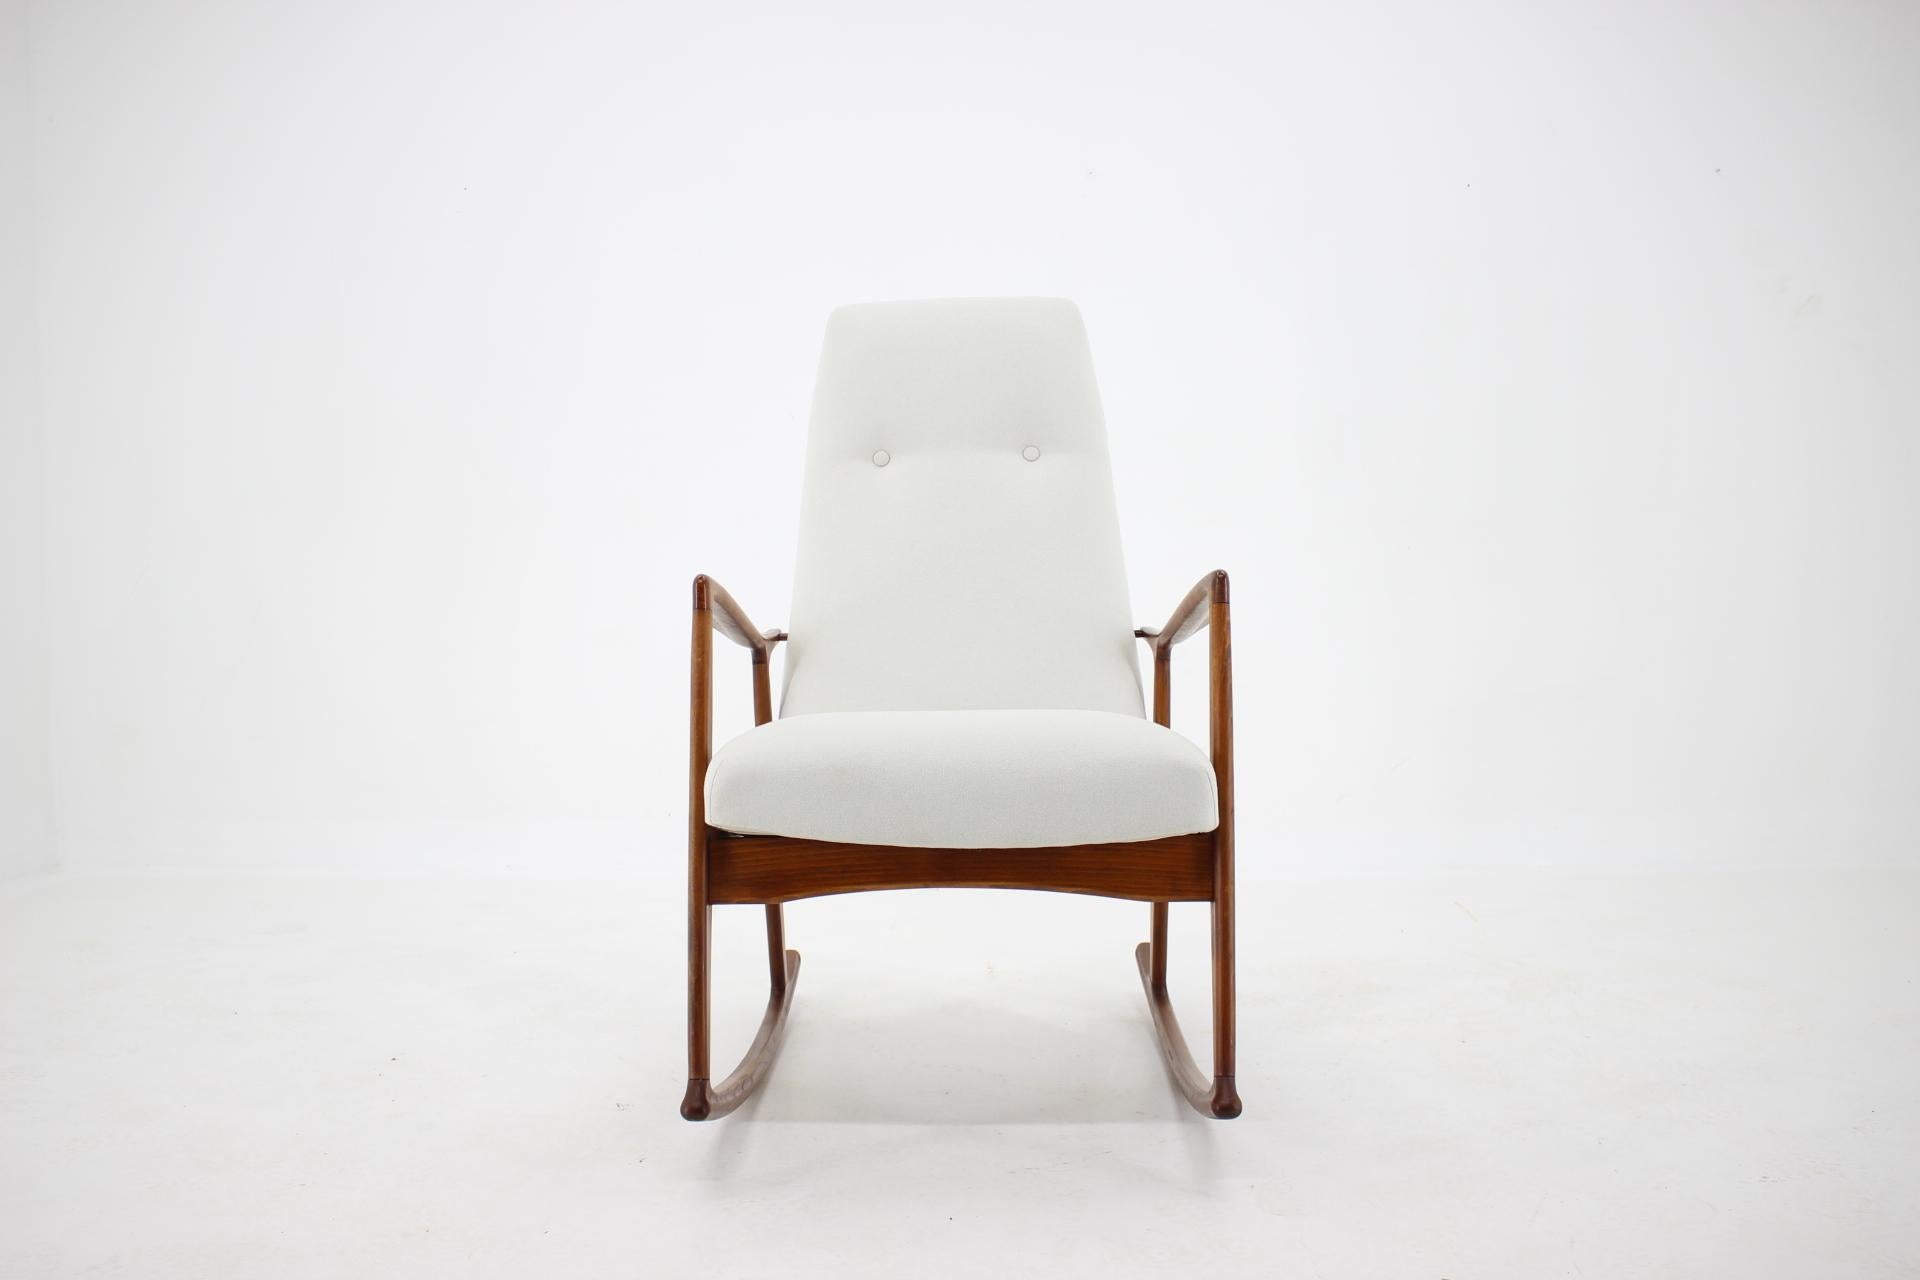 - Newly upholstered - Made of beech wood 
- The wooden parts have been refurbished
- High of seat 47 cm.